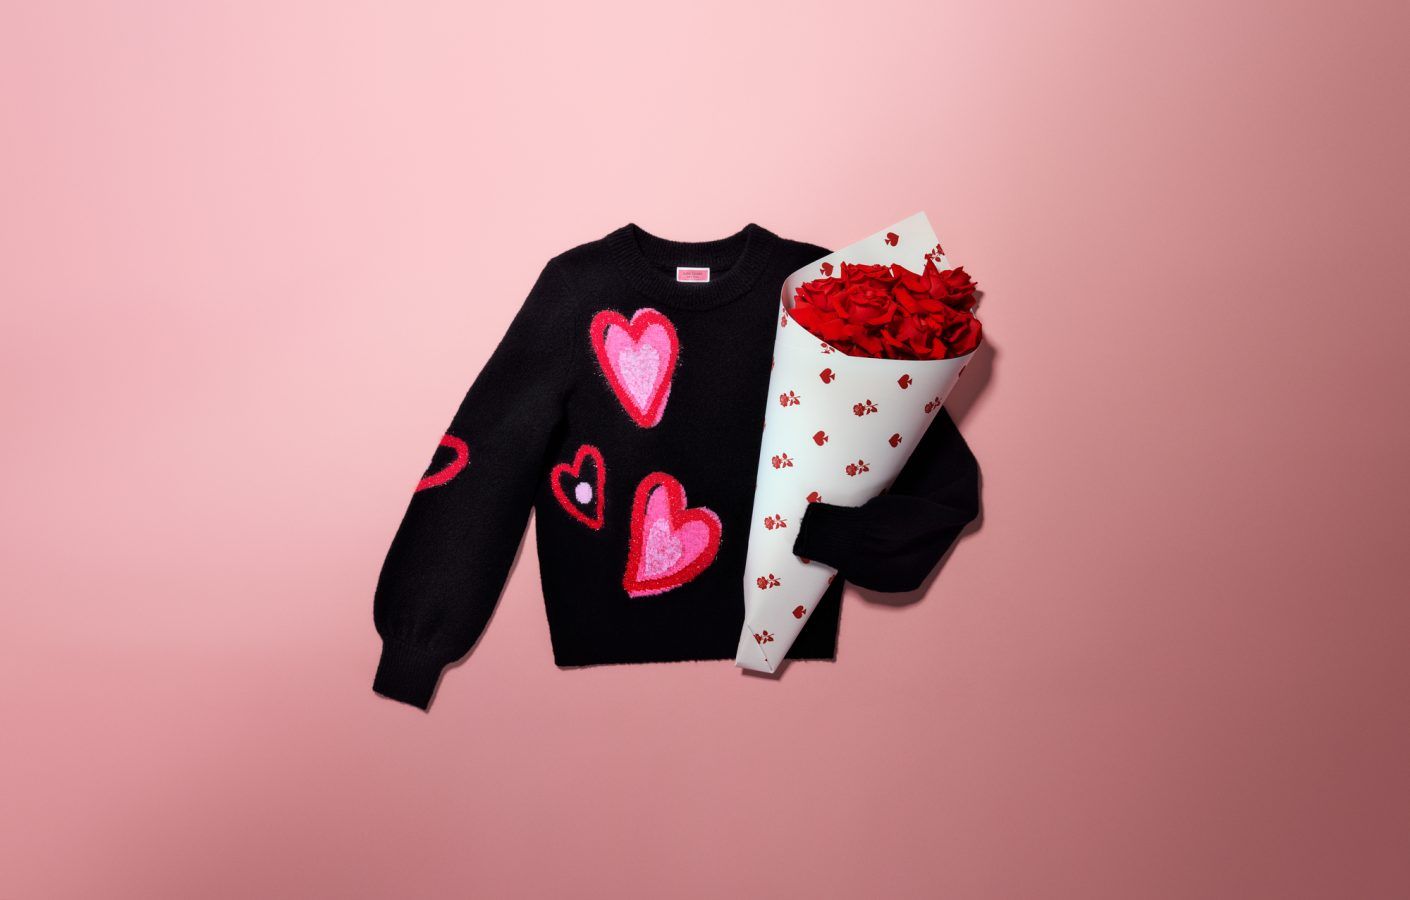 The cutest highlights from the Chinese Valentine's Day 2021 collections